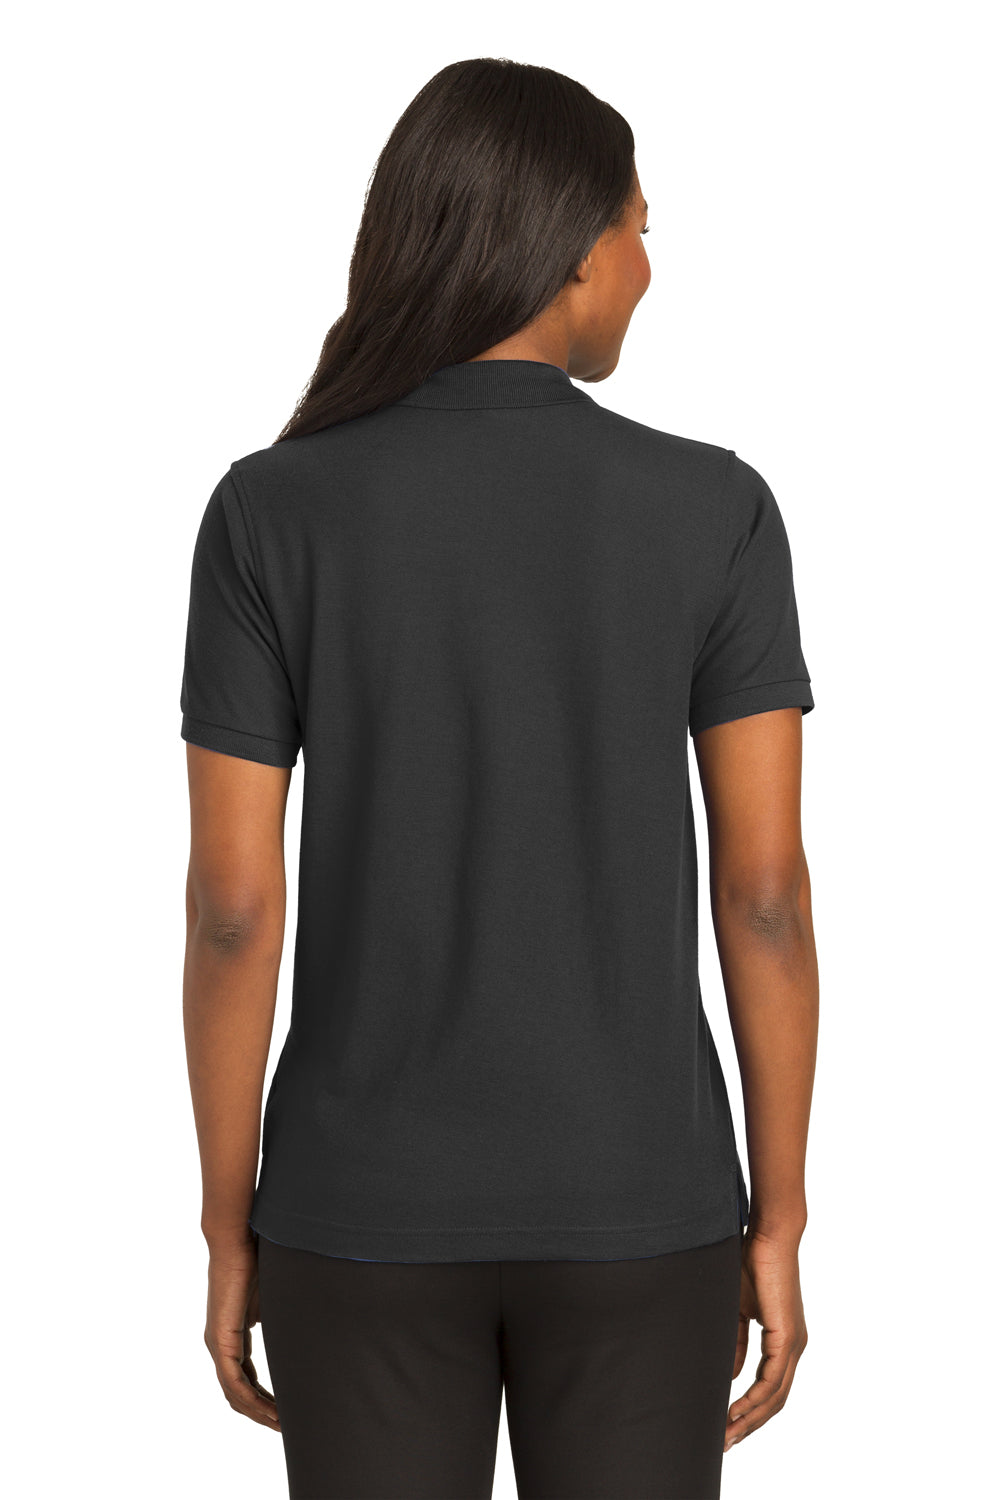 Port Authority L500 Womens Silk Touch Wrinkle Resistant Short Sleeve Polo Shirt Black Back